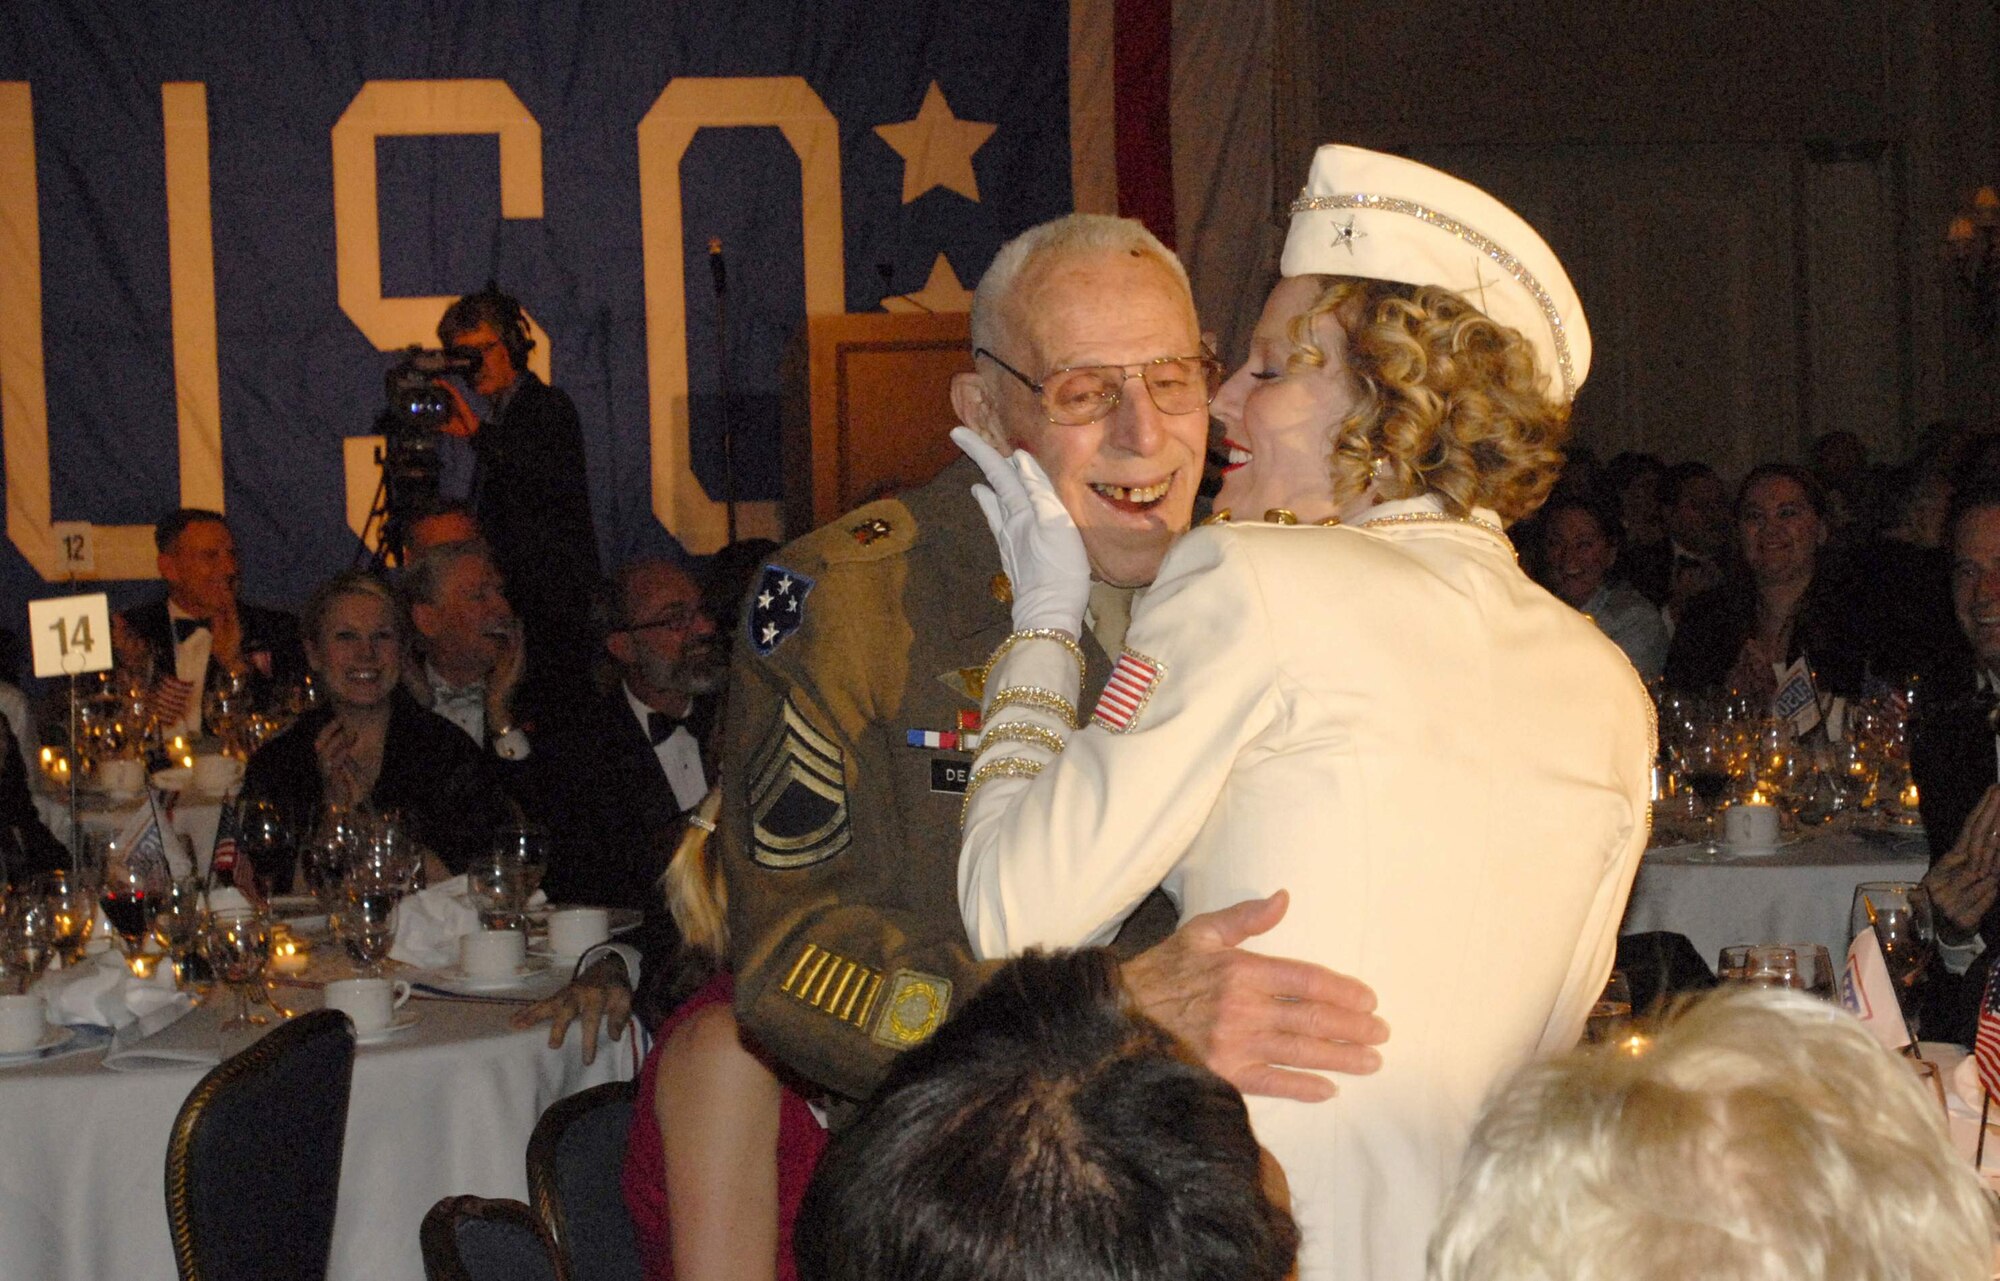 Retired Army Sergeant 1st Class Carlo DePorto gets a smooch from the United Services Organization Amercian Belles member Annie Gane during the USO Annual Award Dinner at the Ritz Carlton March 25 in Washington, D.C. Other volunteers and attendees included model and Fox correspondent Leeann Tweeden, Miss America 2009 Katie Stam, former San Francisco 49er Riki Ellison, and NFL Hall of Famer Anthony Munoz, formerly of the Cincinnati Bengals. (U.S. Air Force photo/Tech. Sgt. Amaani Lyle) 
